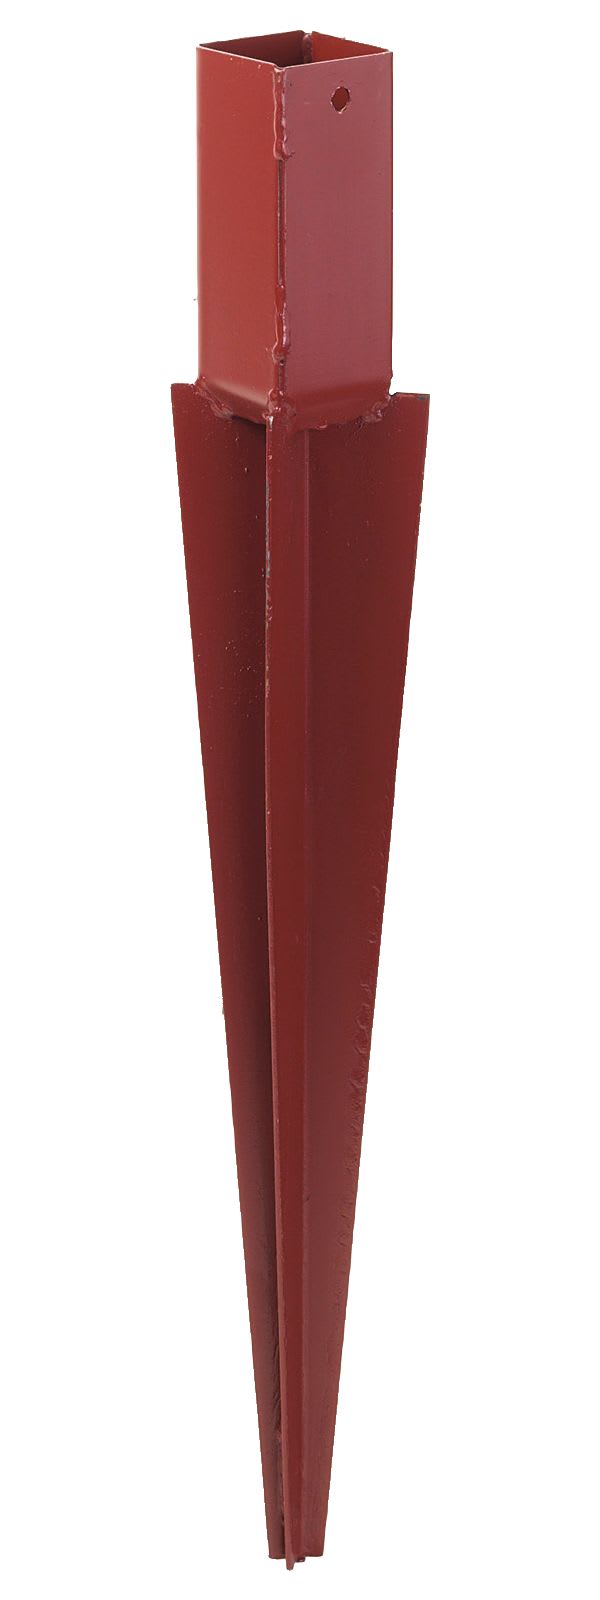 Wickes 450mm Support Spike for Fence Posts -